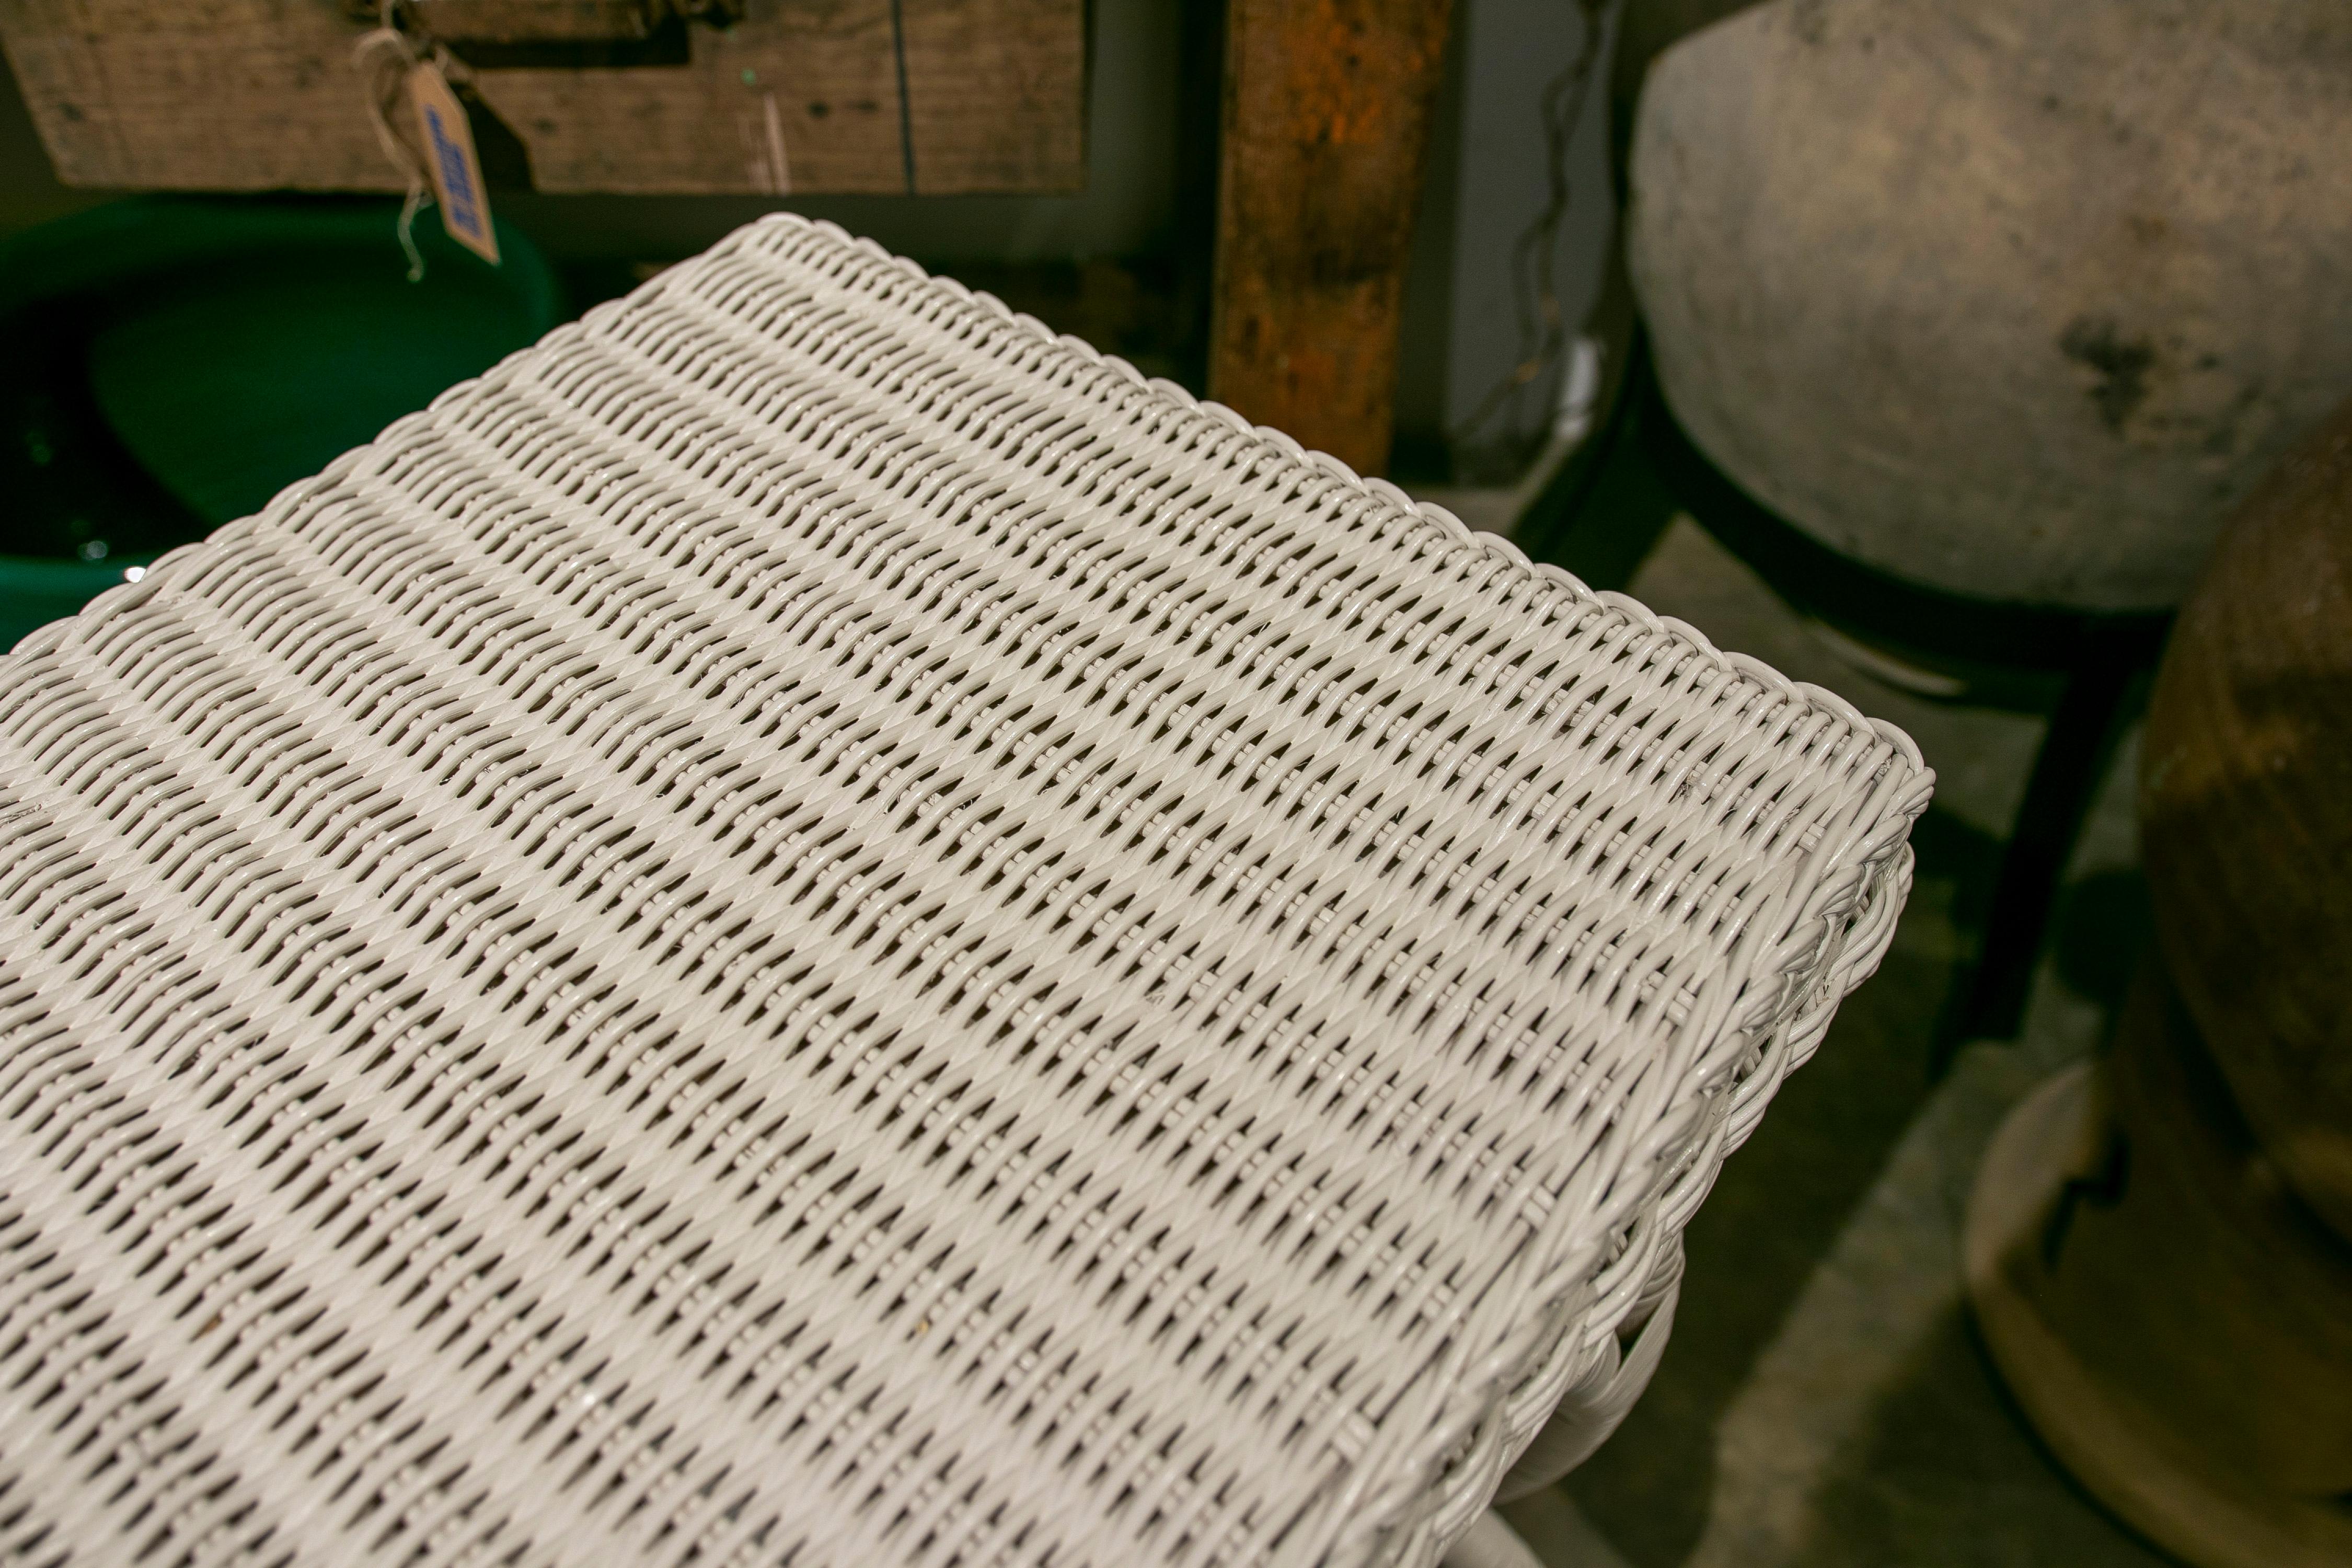 Spanish Handmade Wicker Console Lacquered in White Colour For Sale 4